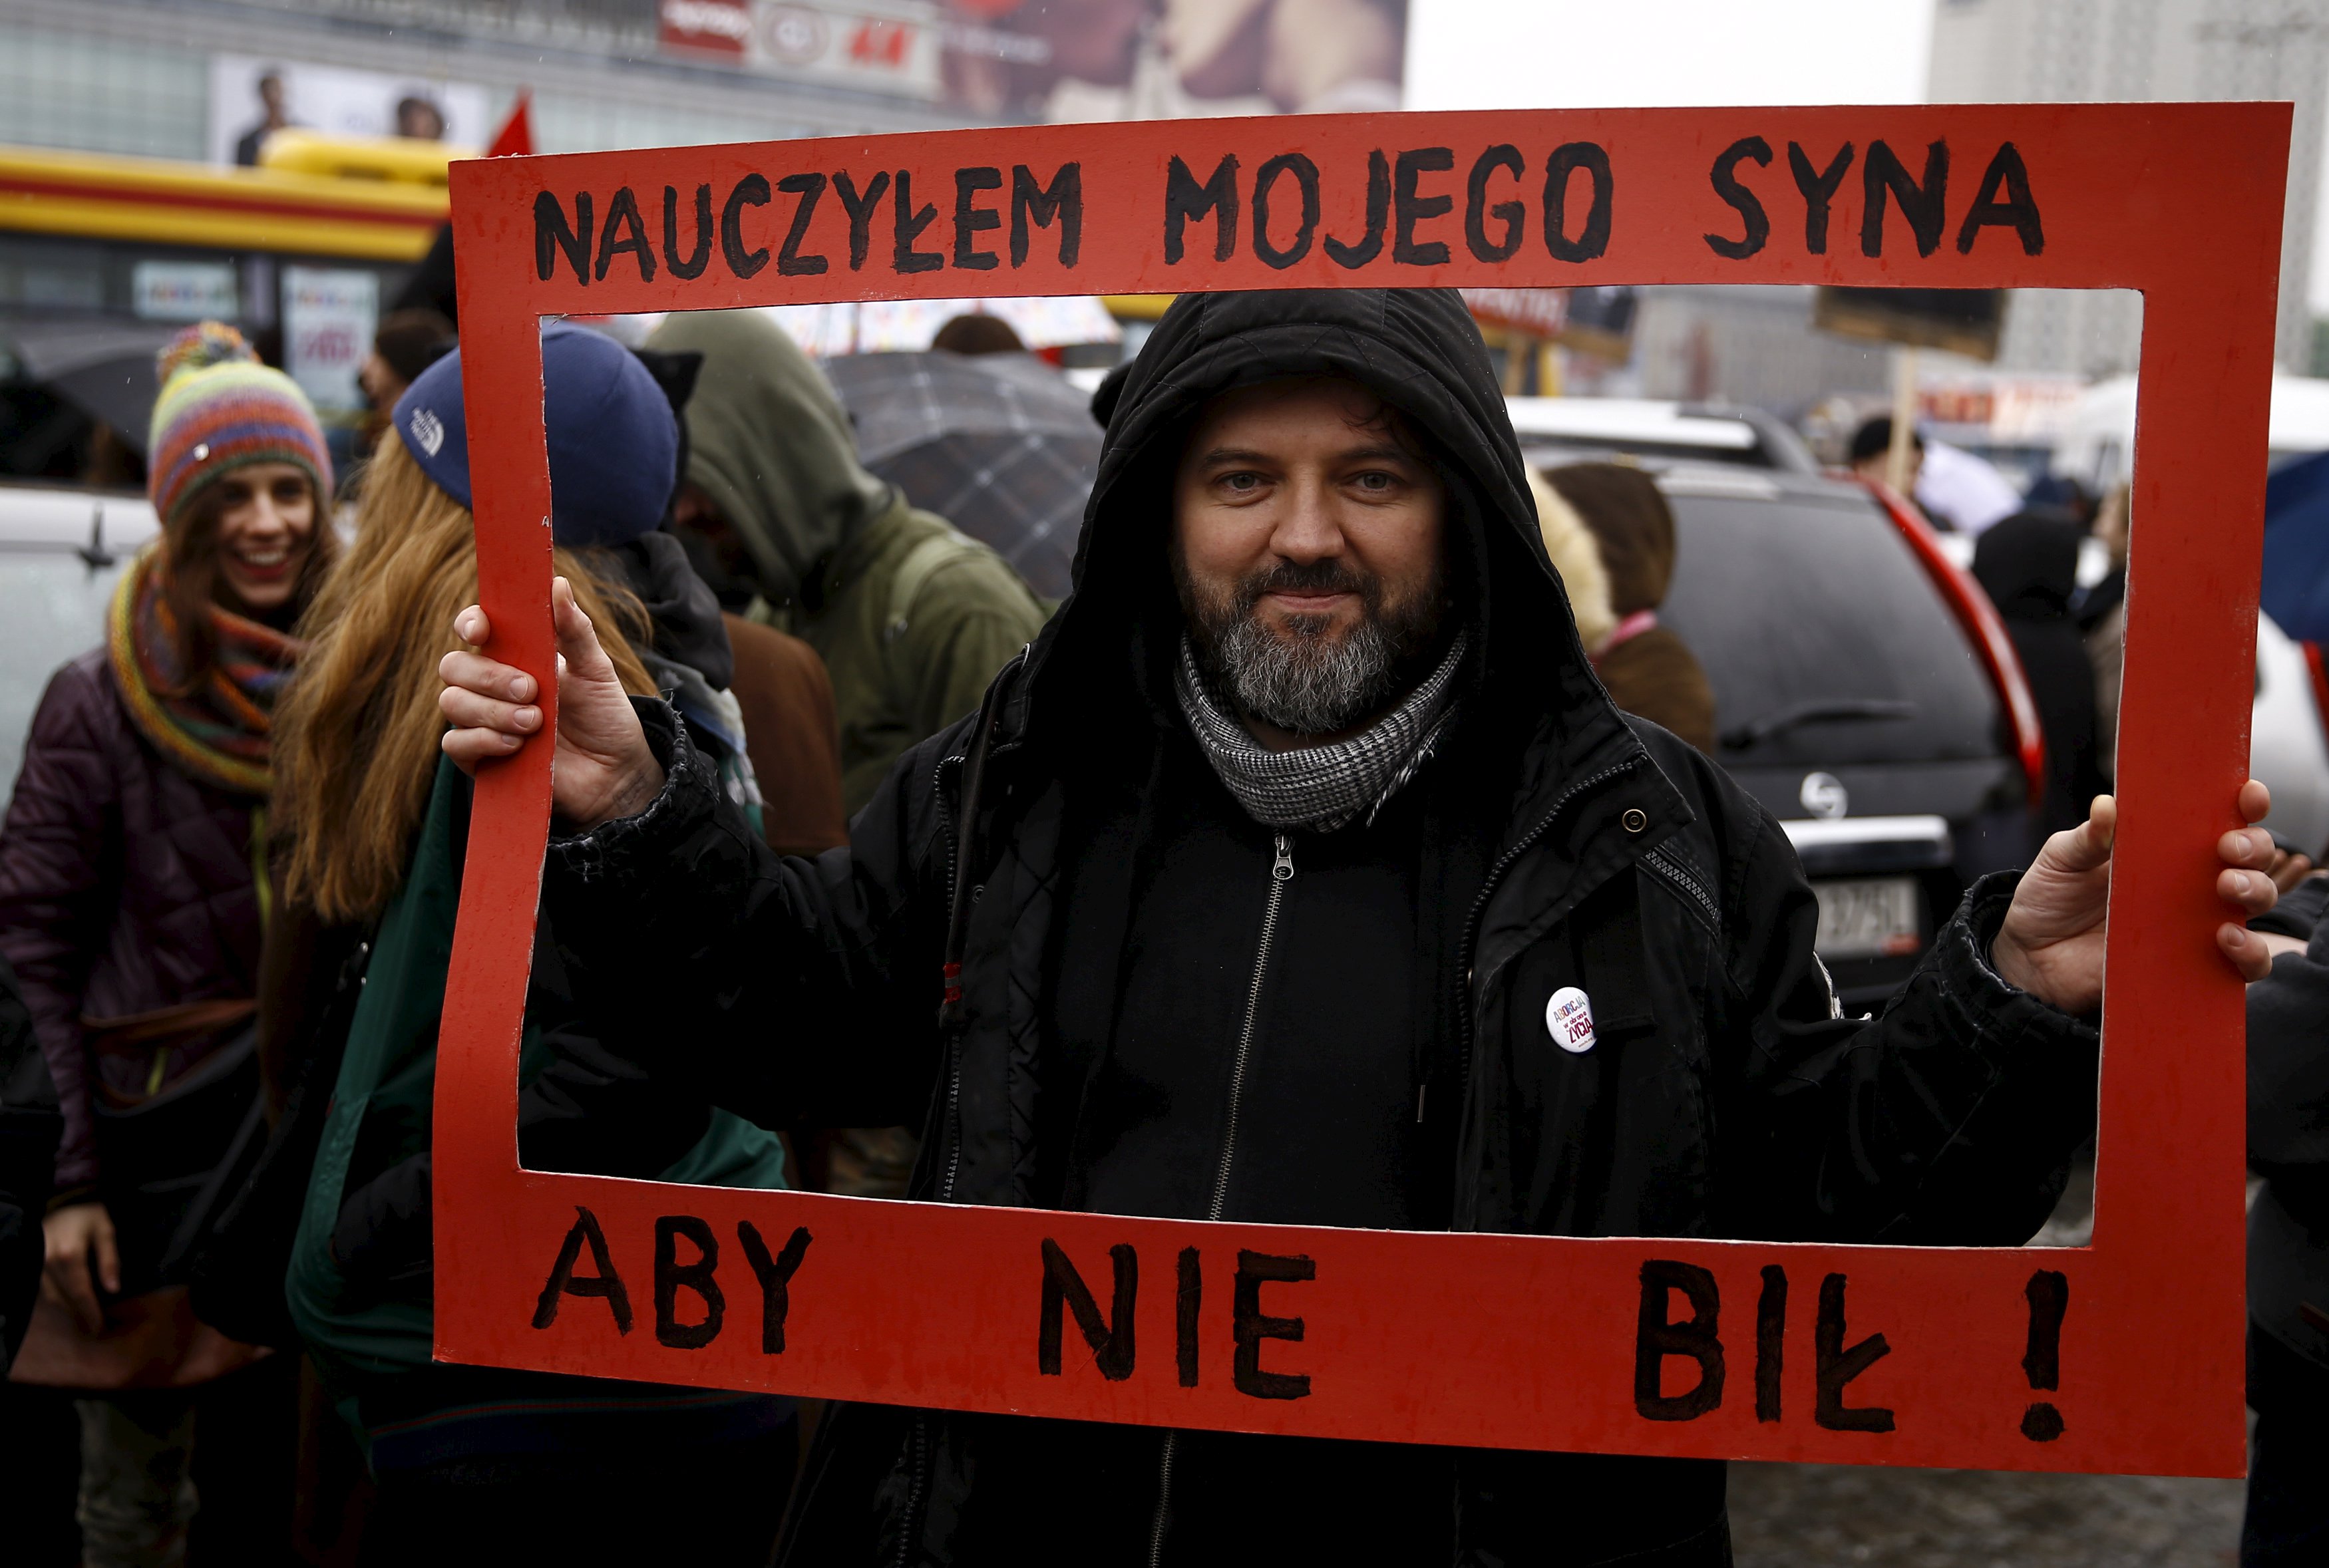 A man holds a placard which reads “I have taught my son to not beat” during an annual march in Poland ahead of International Women’s Day. Photo: Reuters